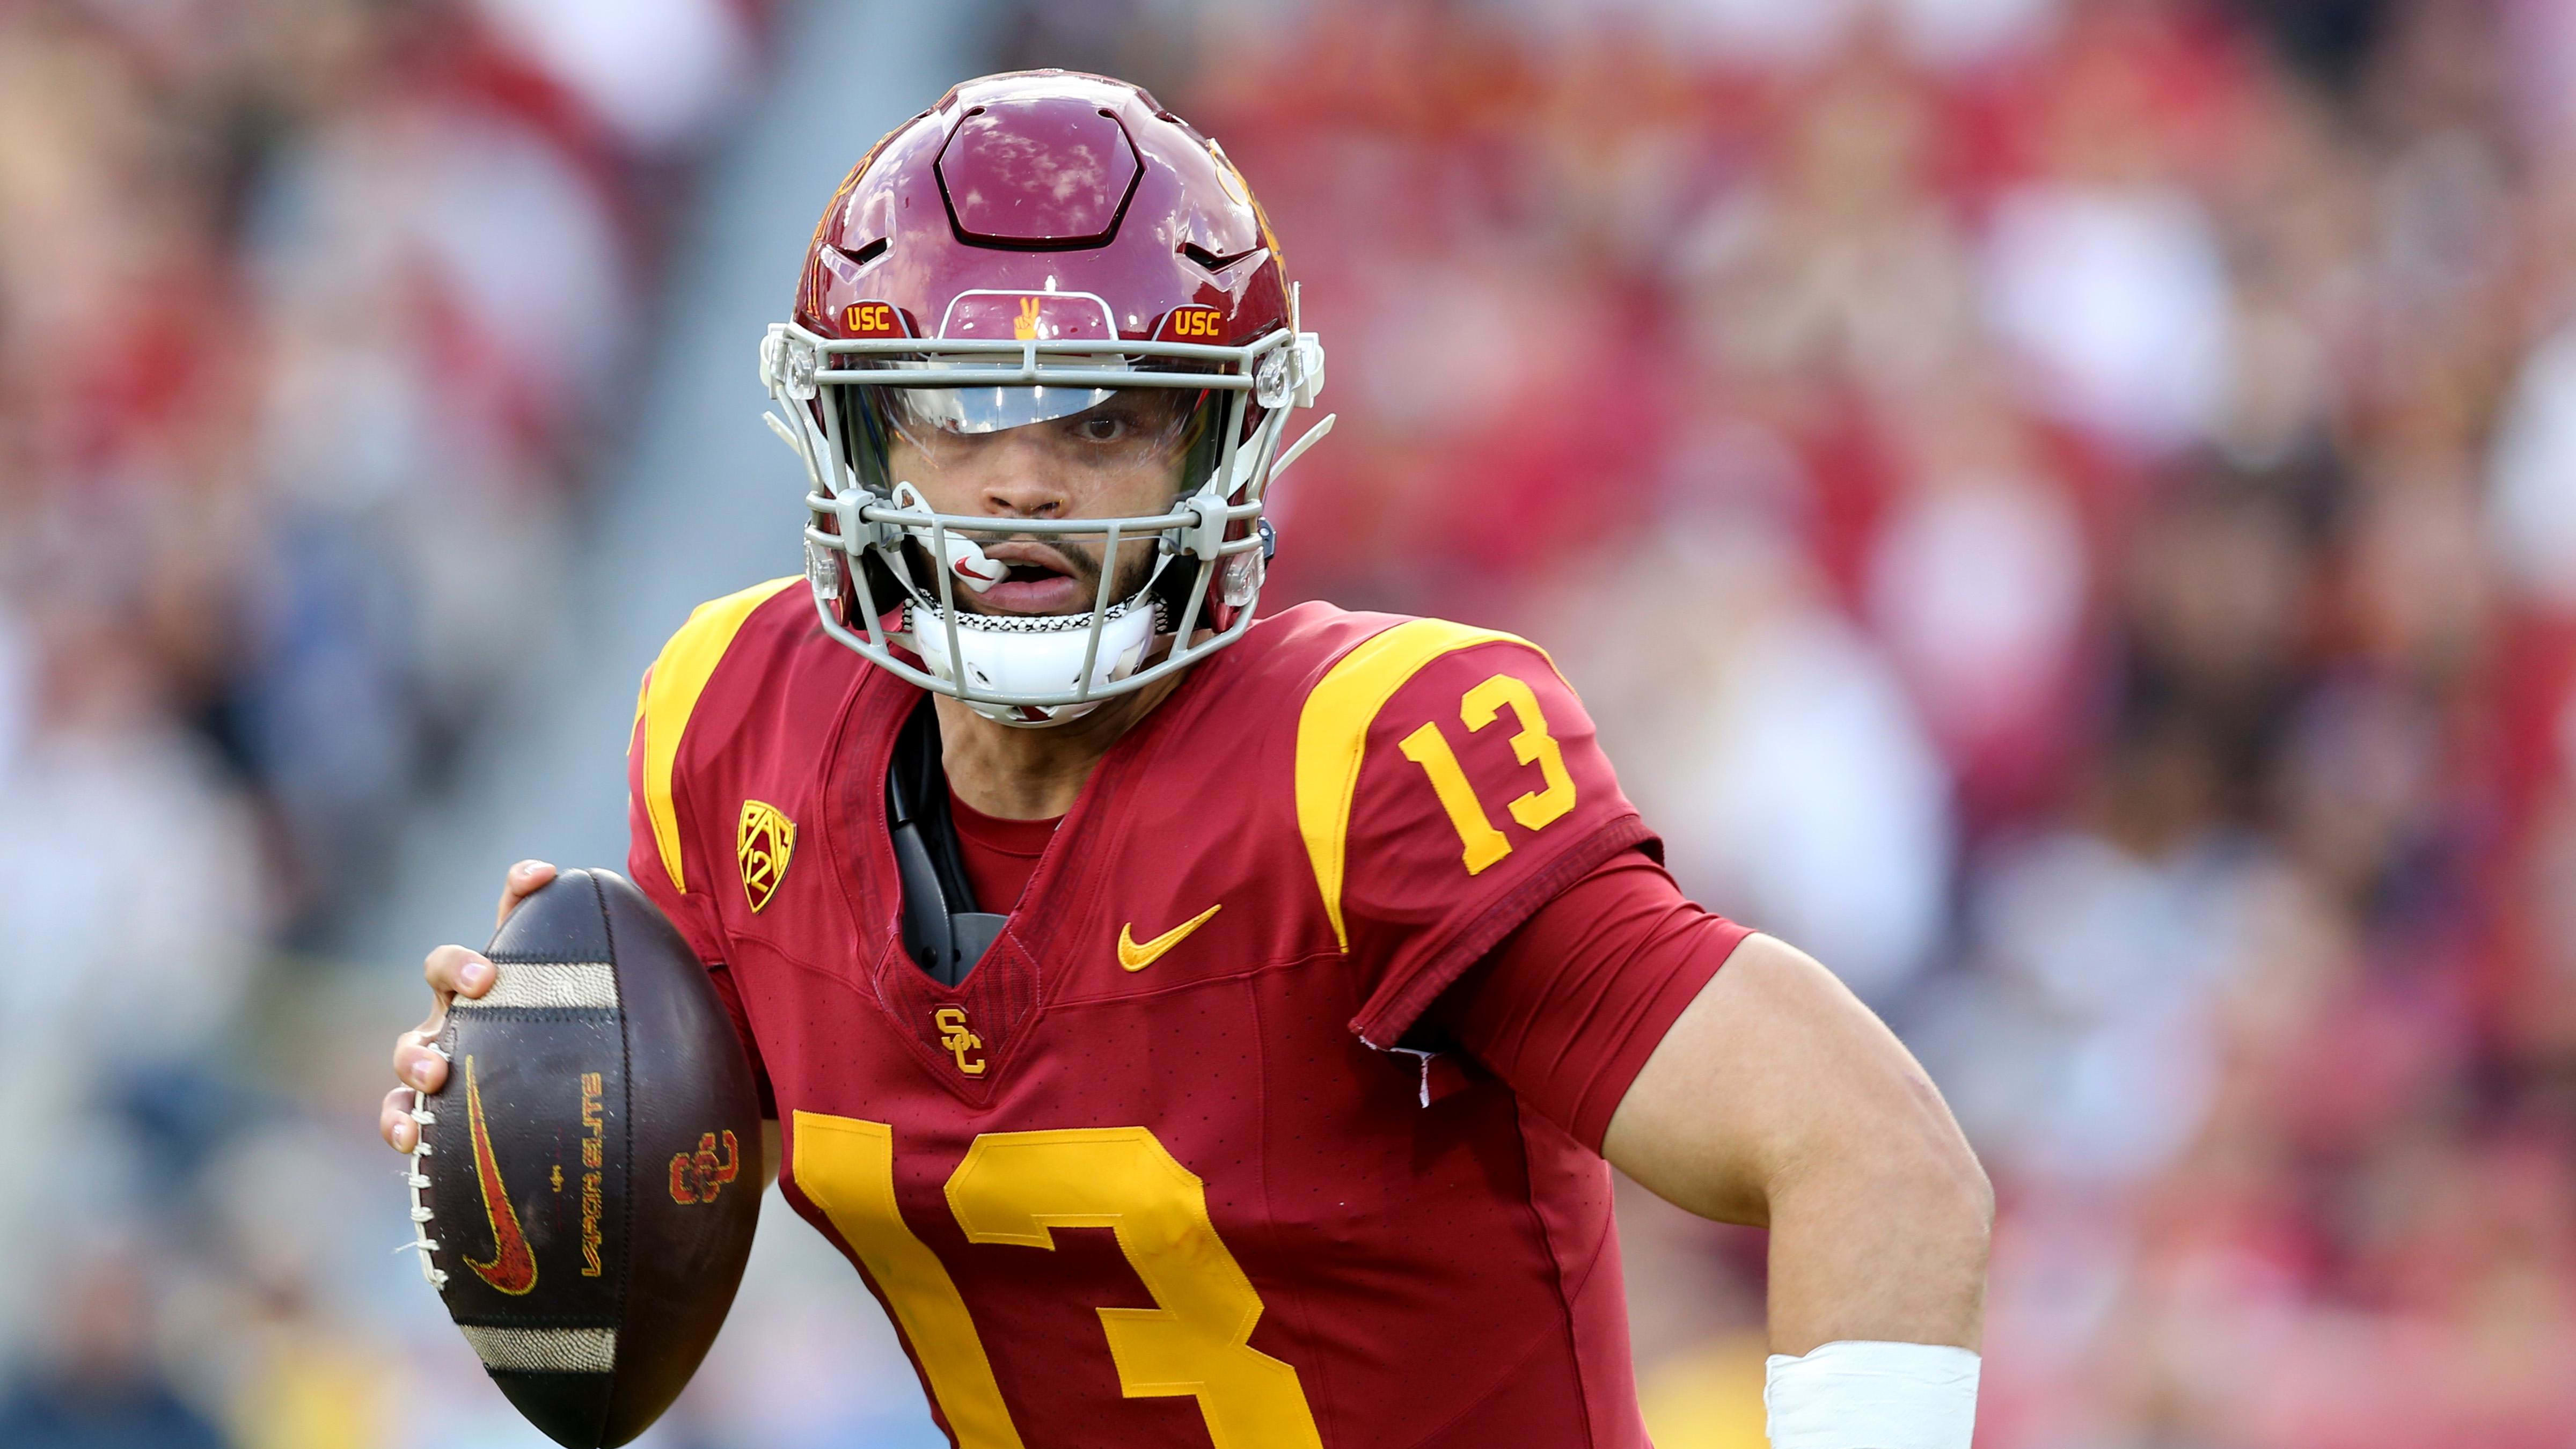 USC Trojans quarterback Caleb Williams scrambles out of the pocket and looks to pass.